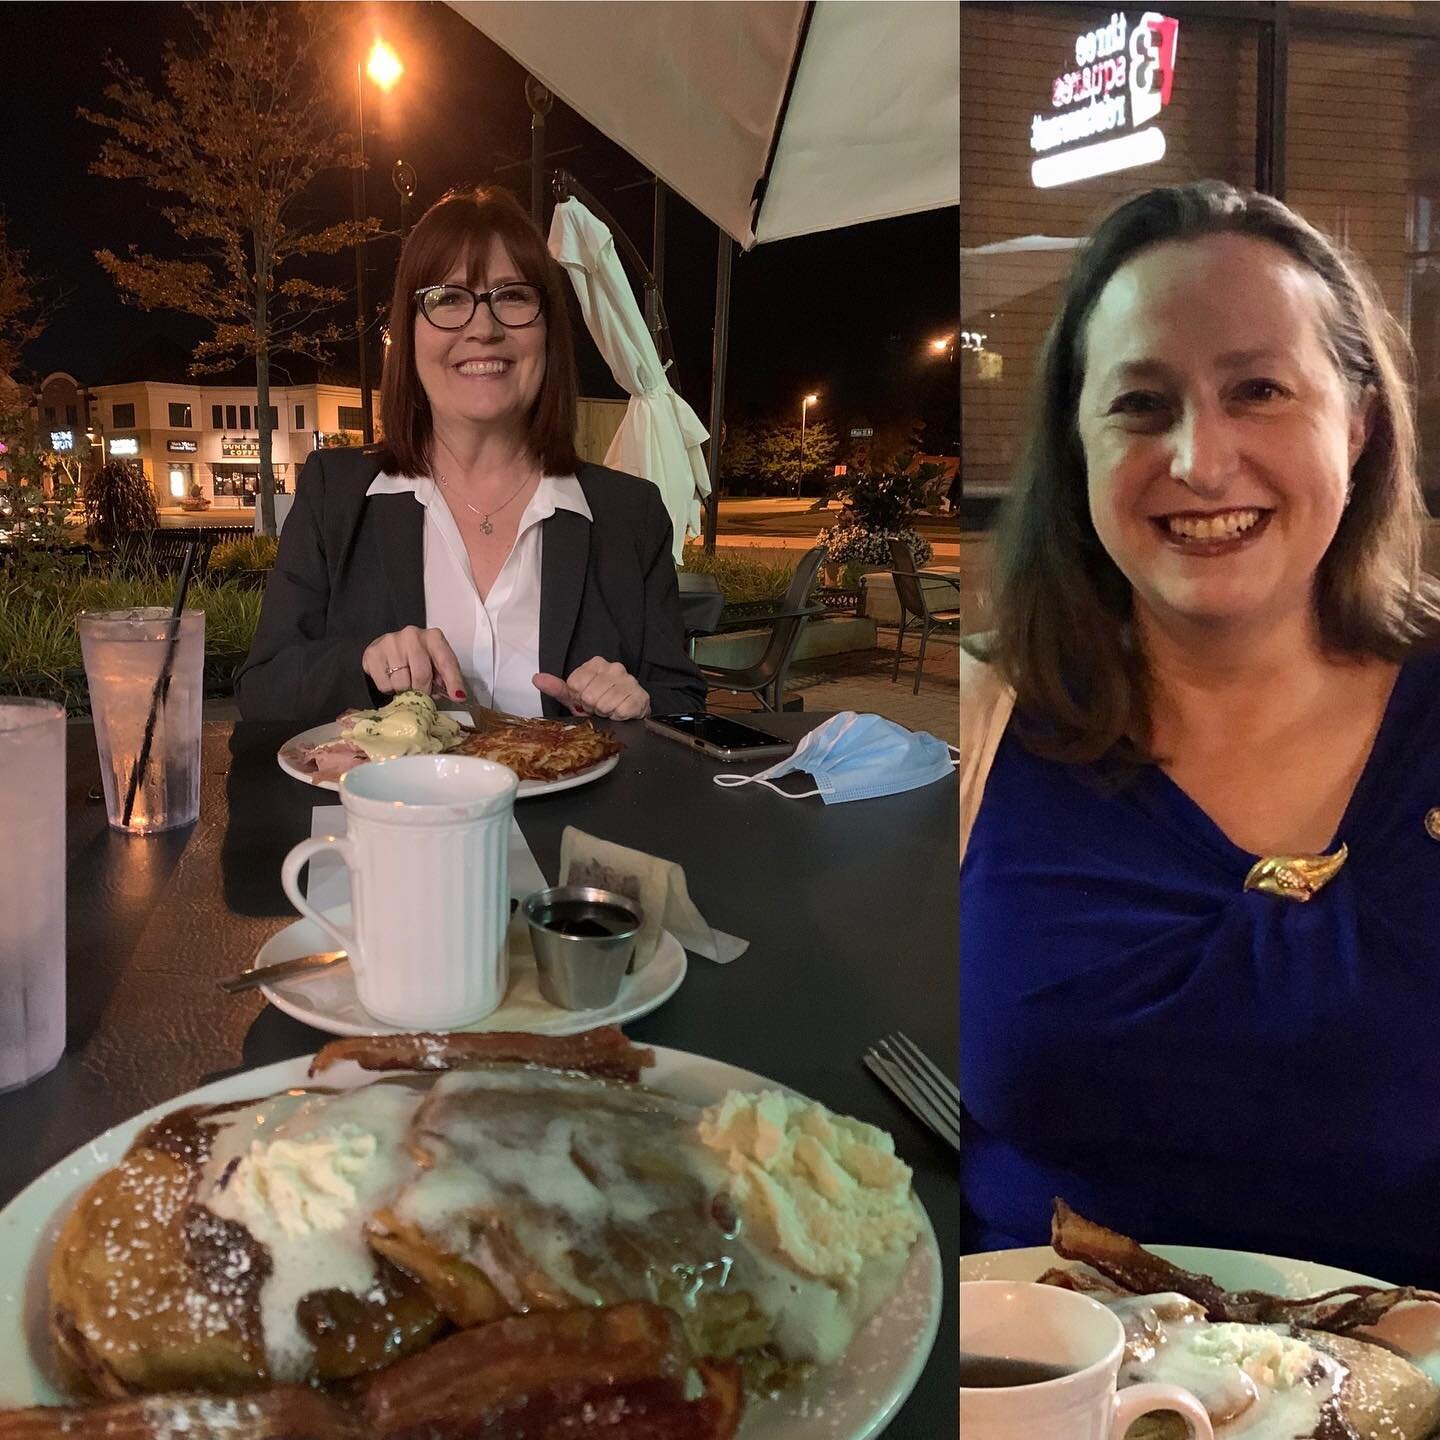 Thanks Senate Candidate Bonnie Westlin and 3 Squares for the fabulous Post LWV Forum Brenner (Breakfast for Dinner)! The Pumpkin Pancakes were fabulous!